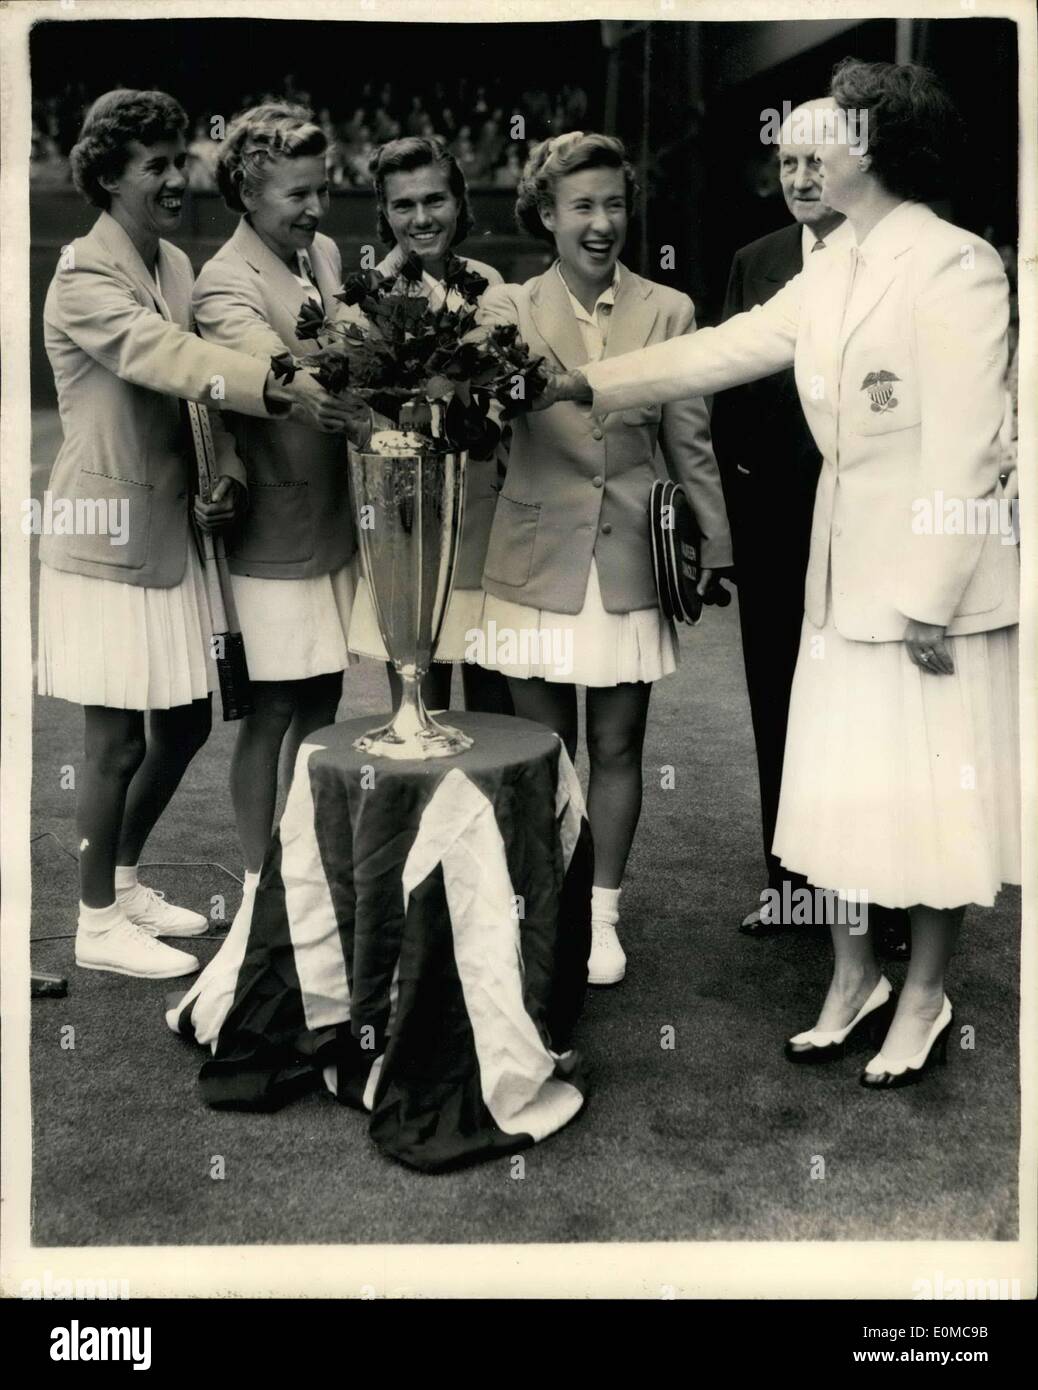 Jun. 12, 1954 - Wightman Cup At Wimbledon: Photo shows. Smiles of victory from players after their victory at rain soaked Wimbledon today. Lord TEmplewood, who presented the trophy is seen with (left to right), Doris Hart, Louise Brough, Shirley Fry, Maureen (Little Mo) Connolly, and Mrs. Du pont (Captain). The American girls gained the Cup by winning the first much today. Stock Photo